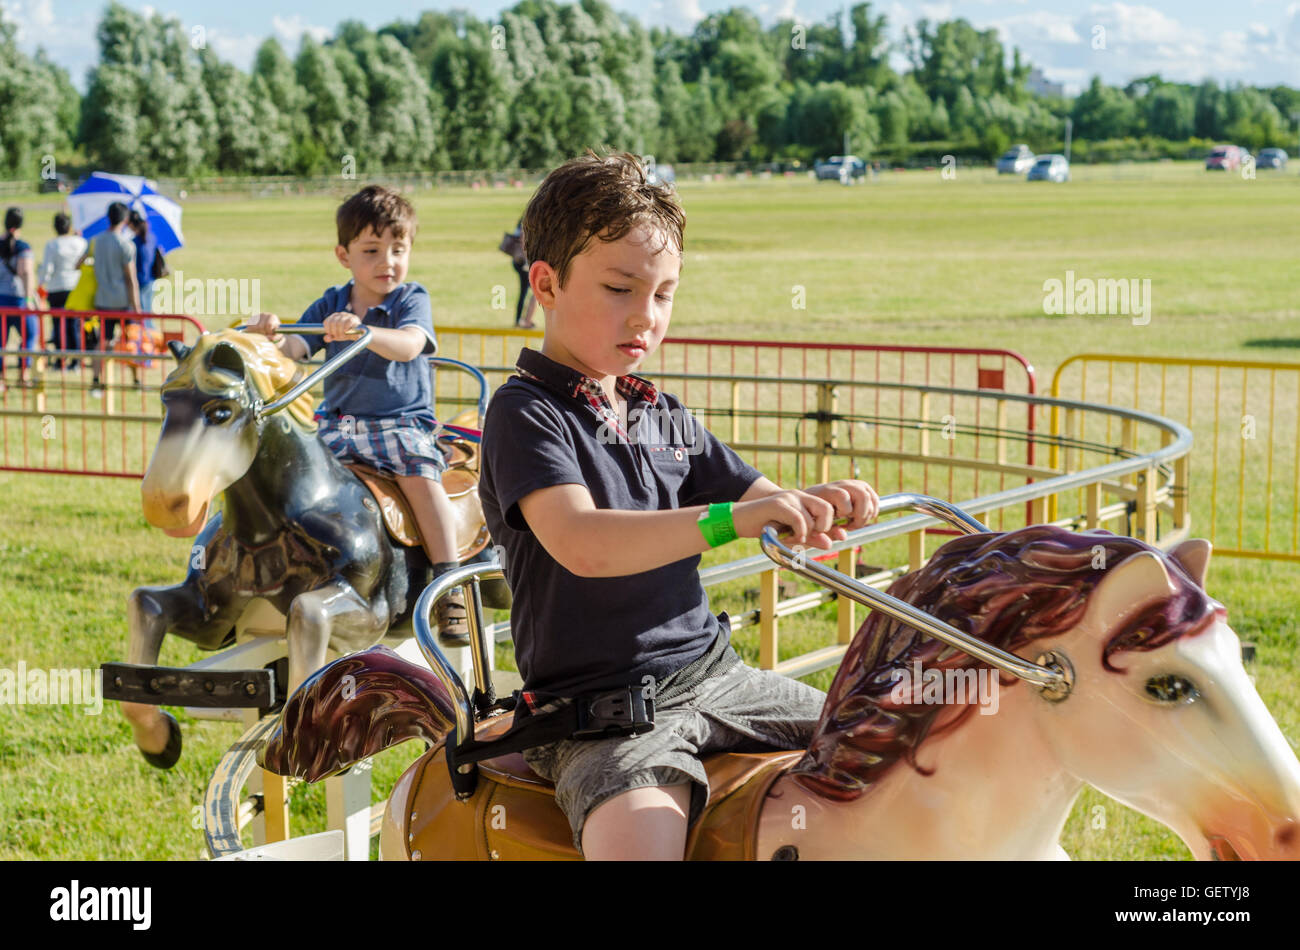 Two young boys ride on a ride at a fairground where they sit on toy horses and ride around a track. Stock Photo